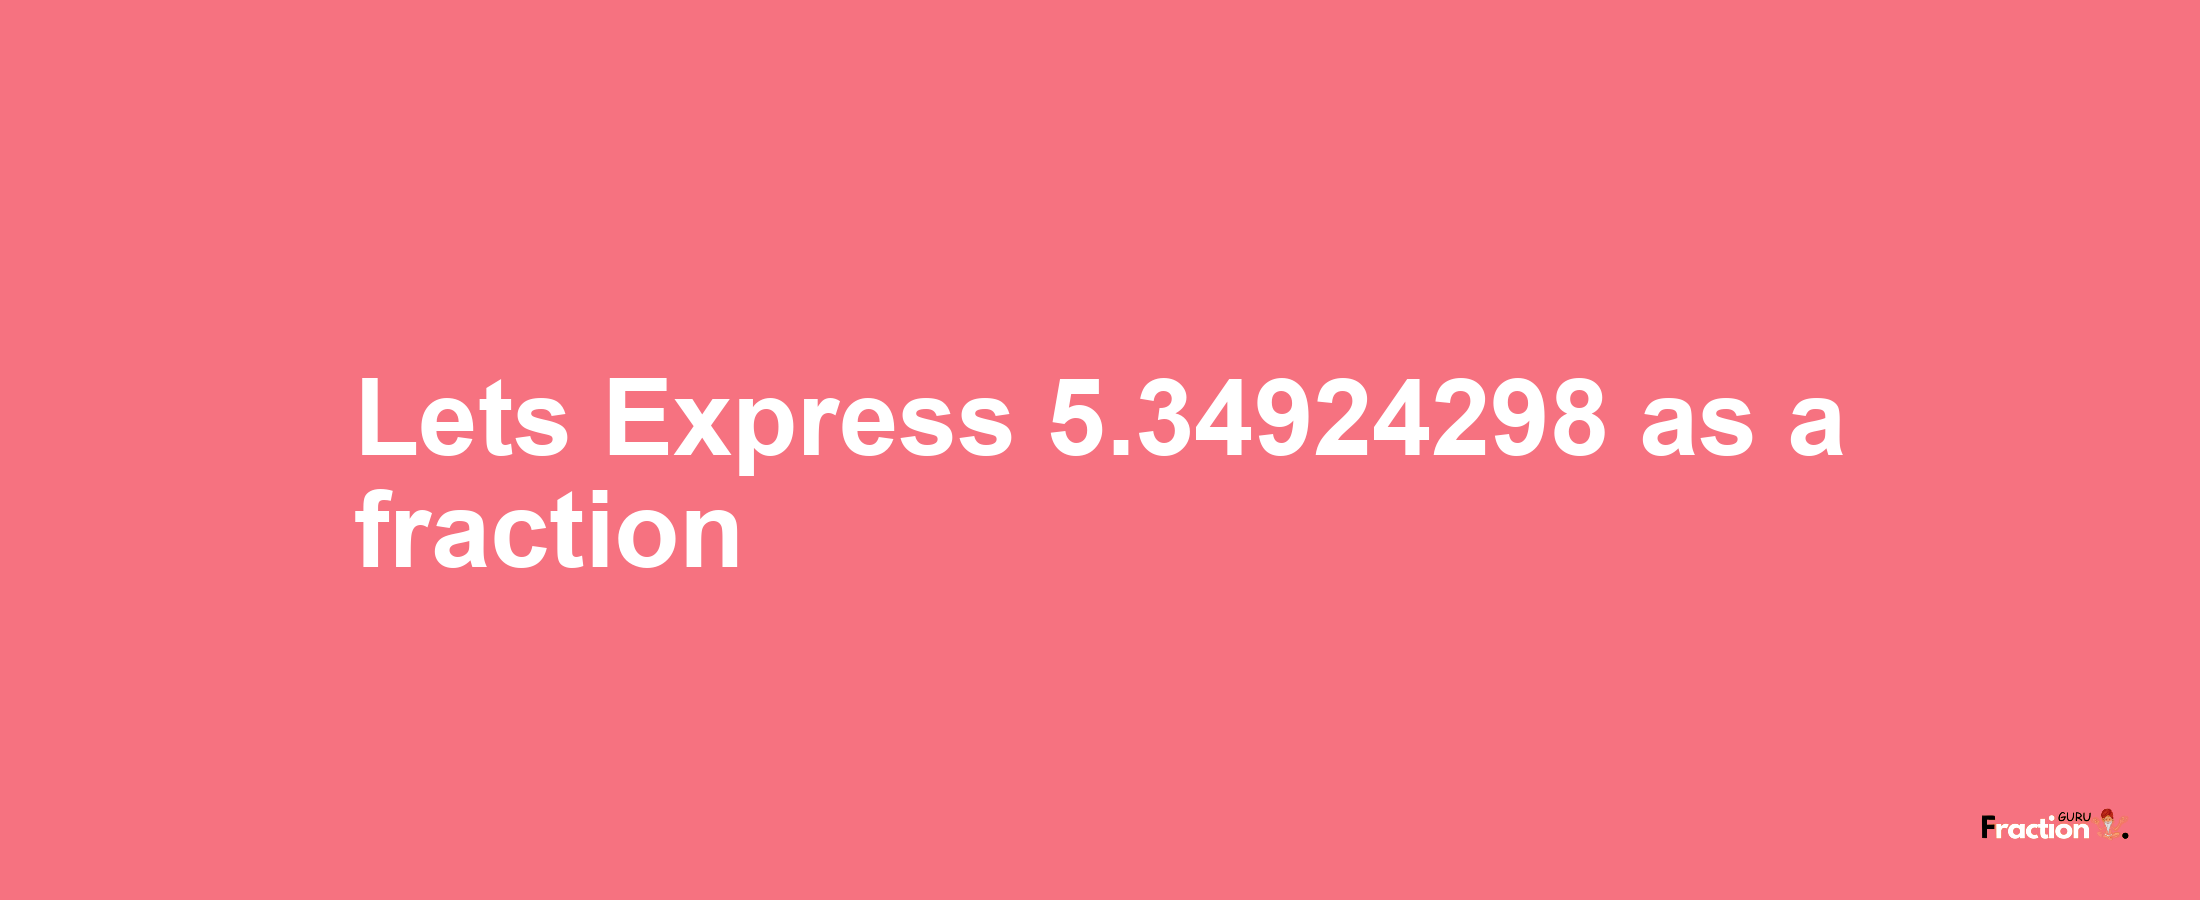 Lets Express 5.34924298 as afraction